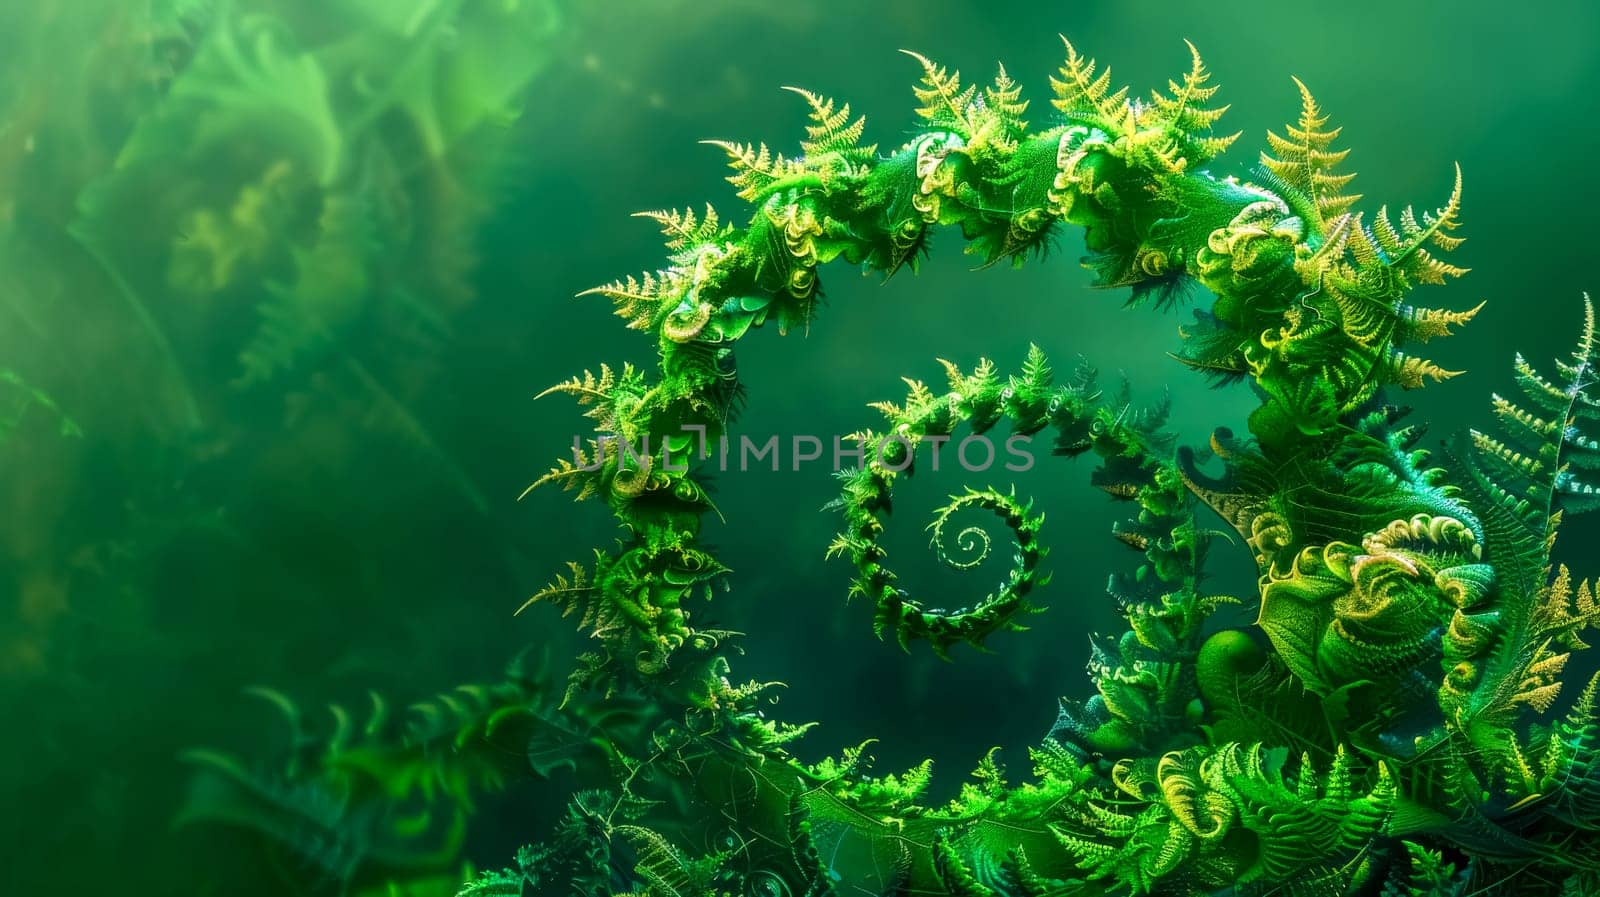 Digital artwork of a mystical sea world with swirling green coral formations on a vibrant background